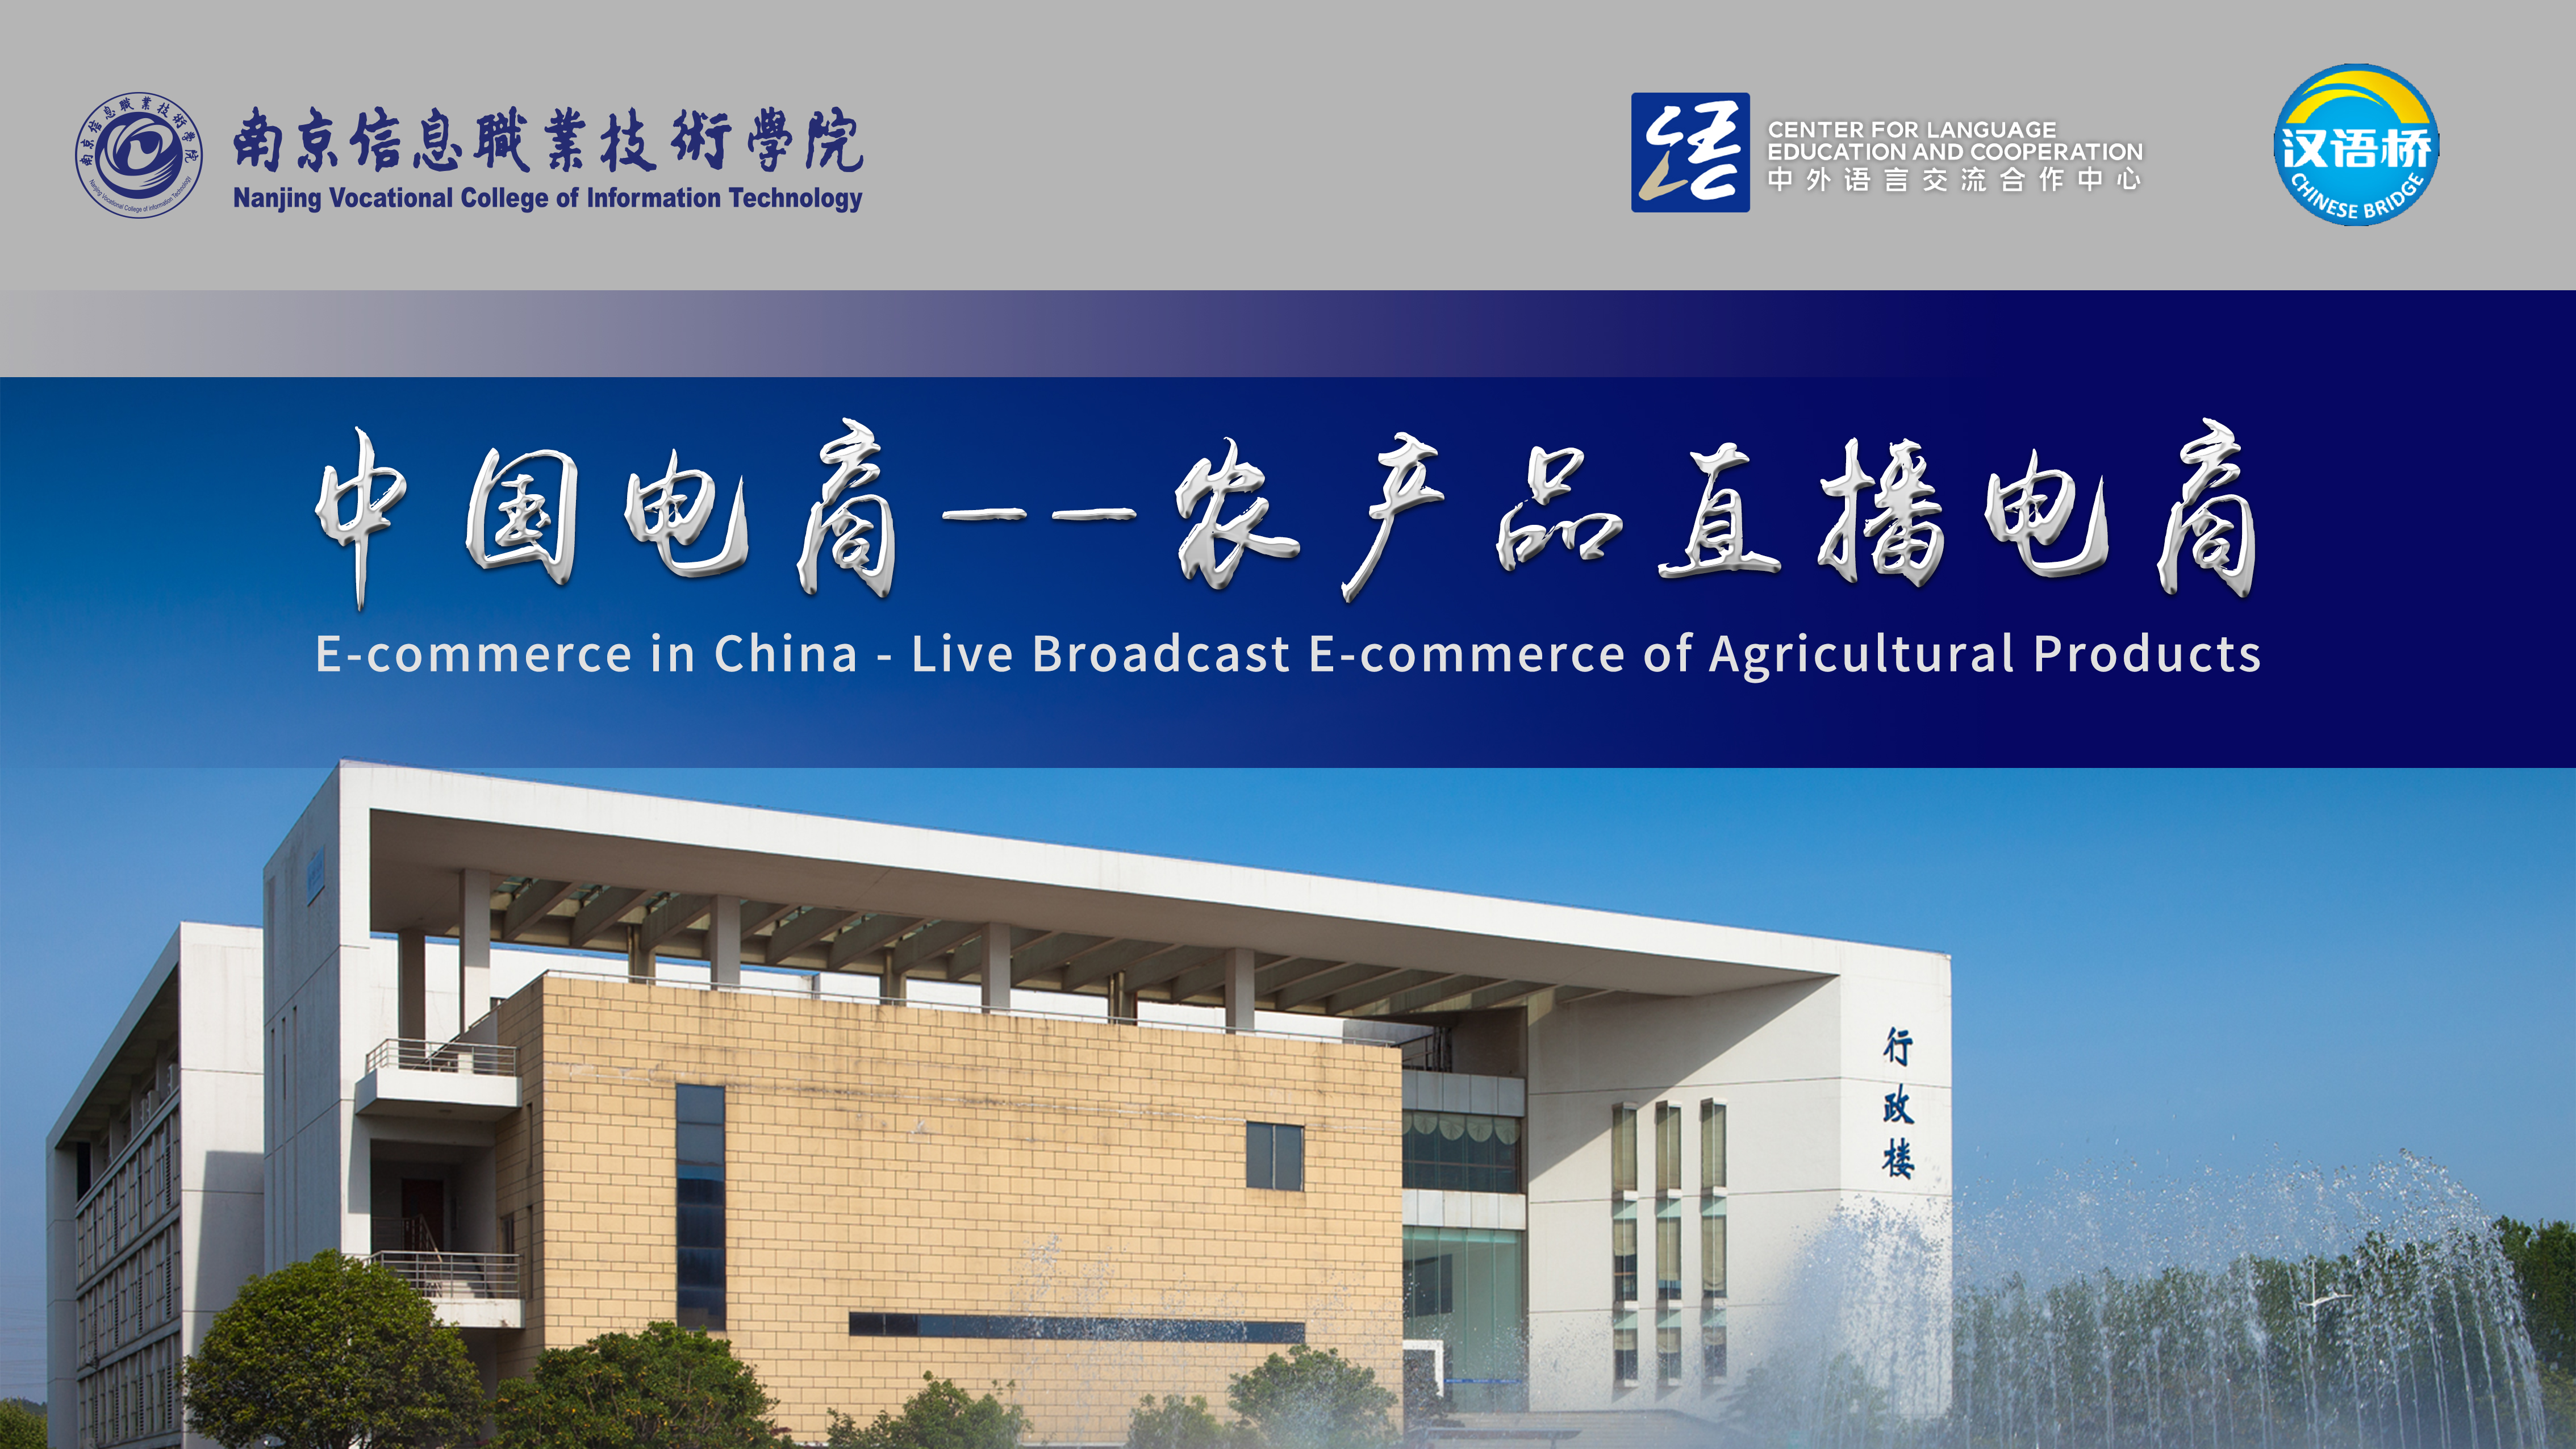 E-commerce in China - Live Broadcast E-commerce of Agricultural Products